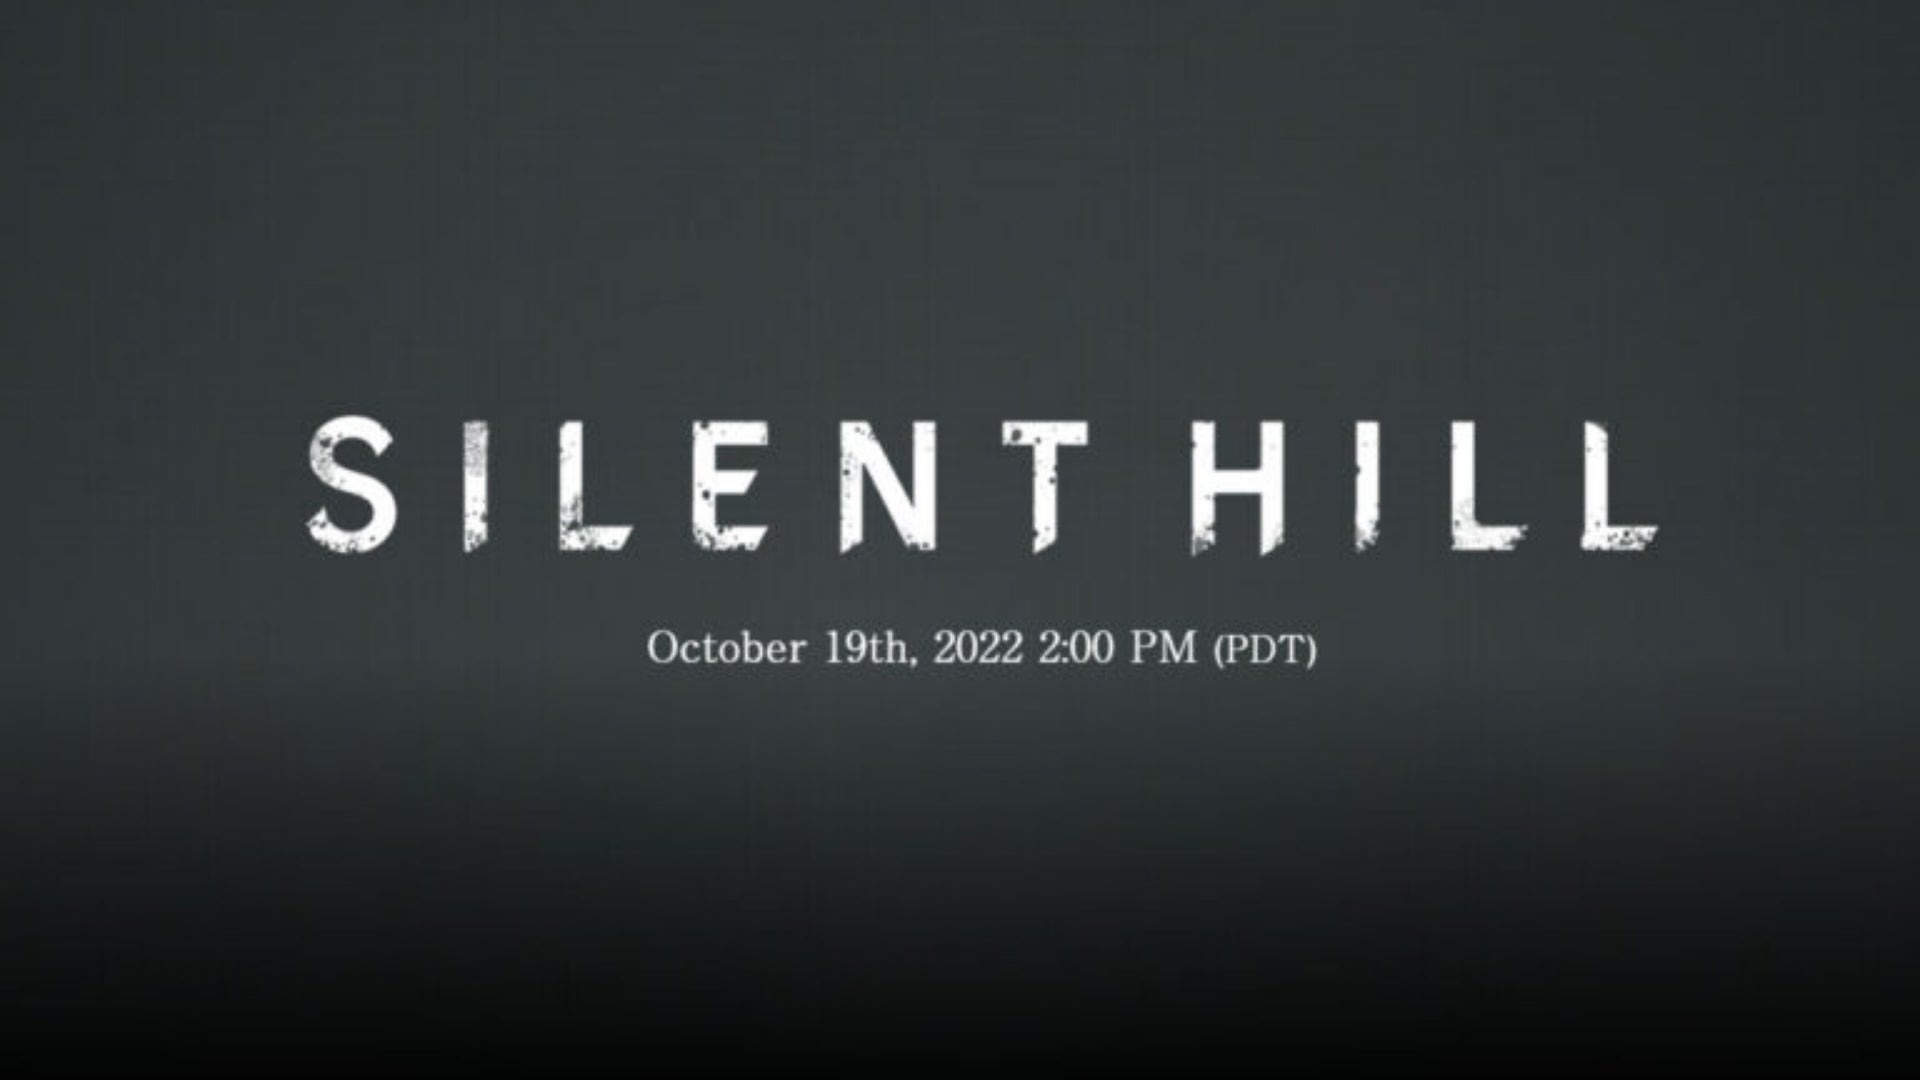 Konami reveals that Silent Hill is building a comeback, much more data coming on Wednesday